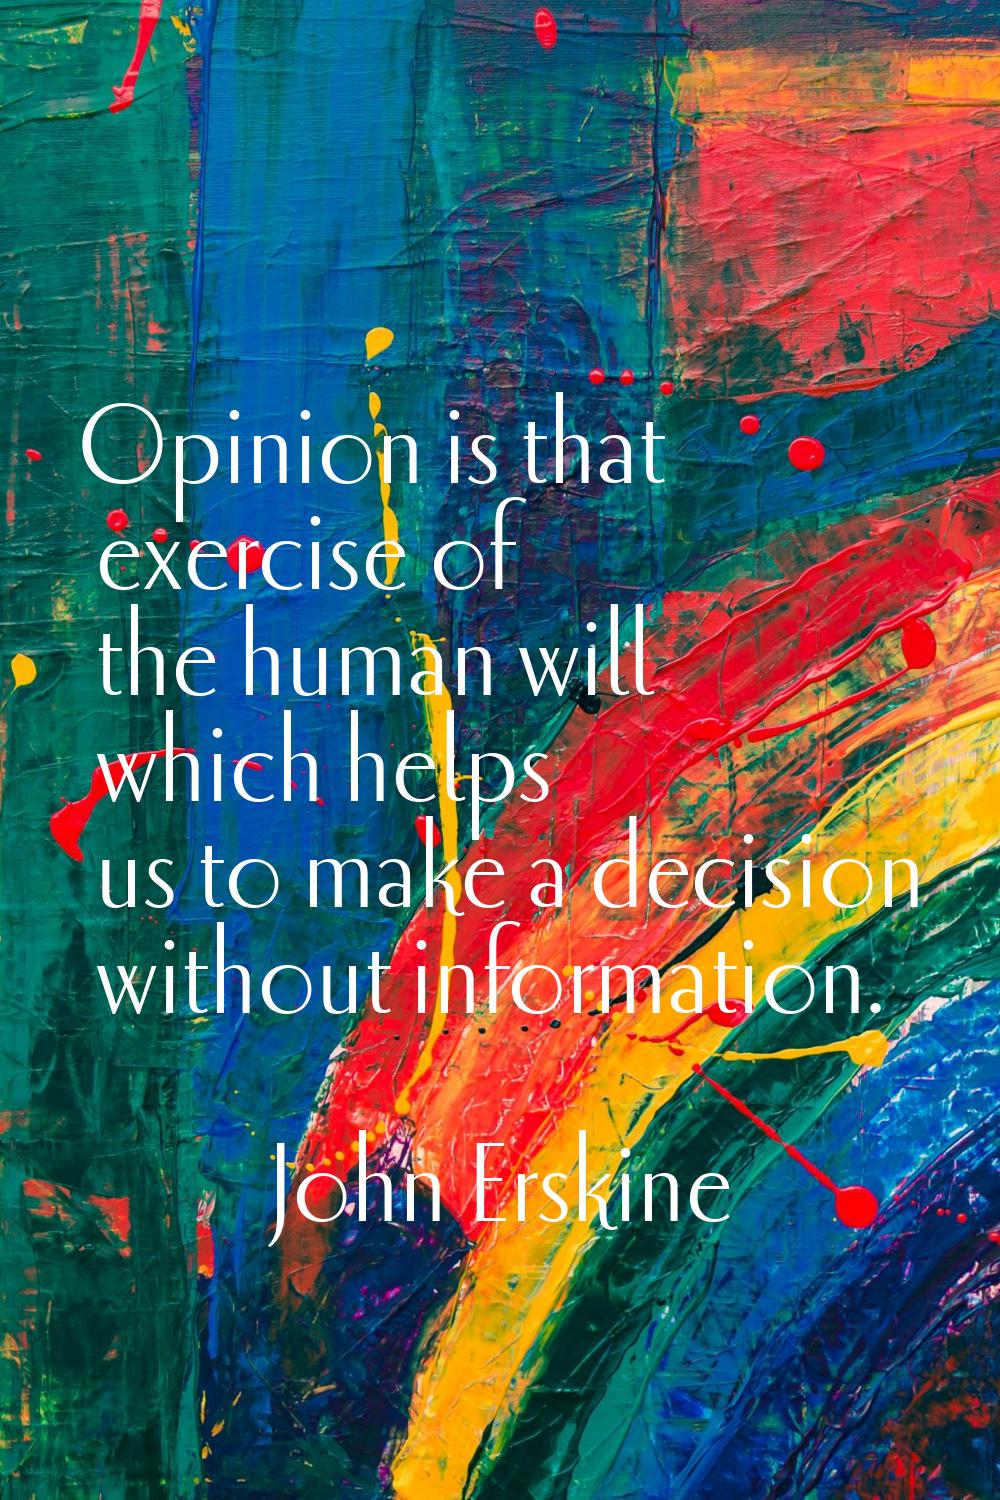 Opinion is that exercise of the human will which helps us to make a decision without information.